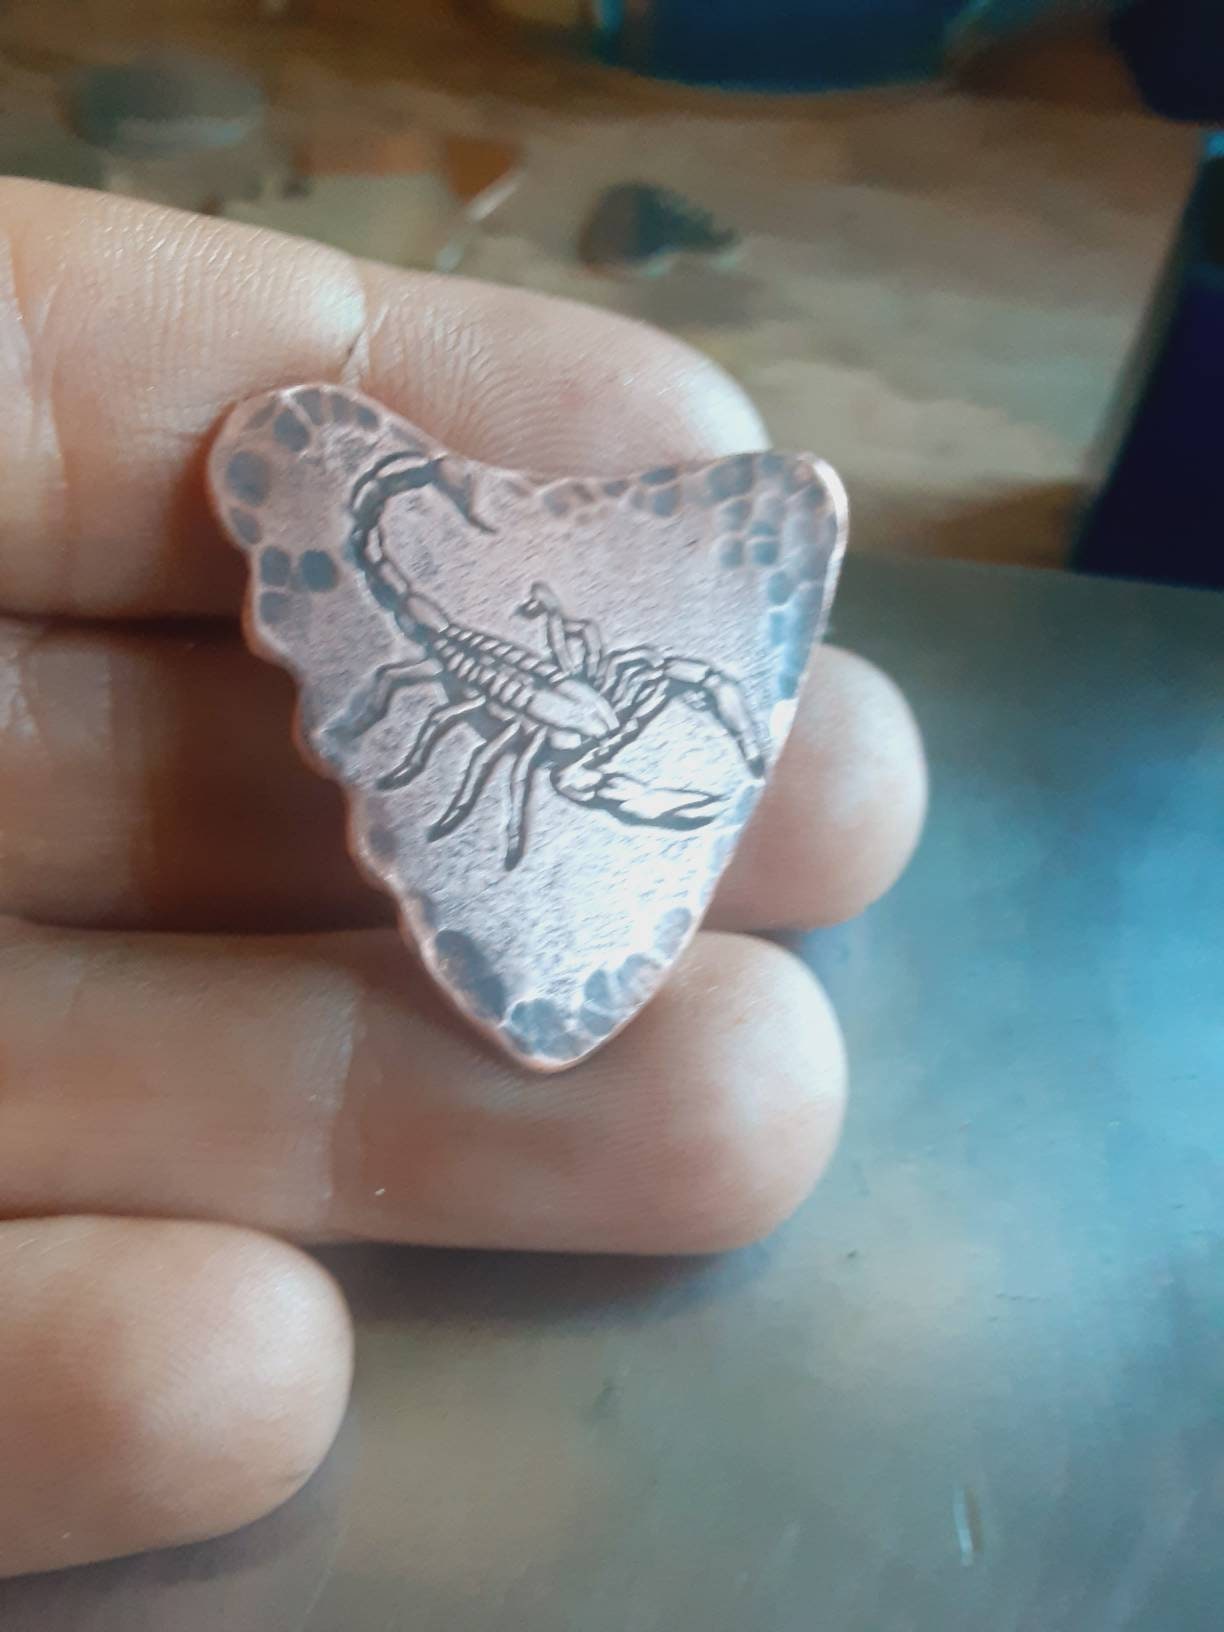 Copper shark tooth guitar pick with scorpion design